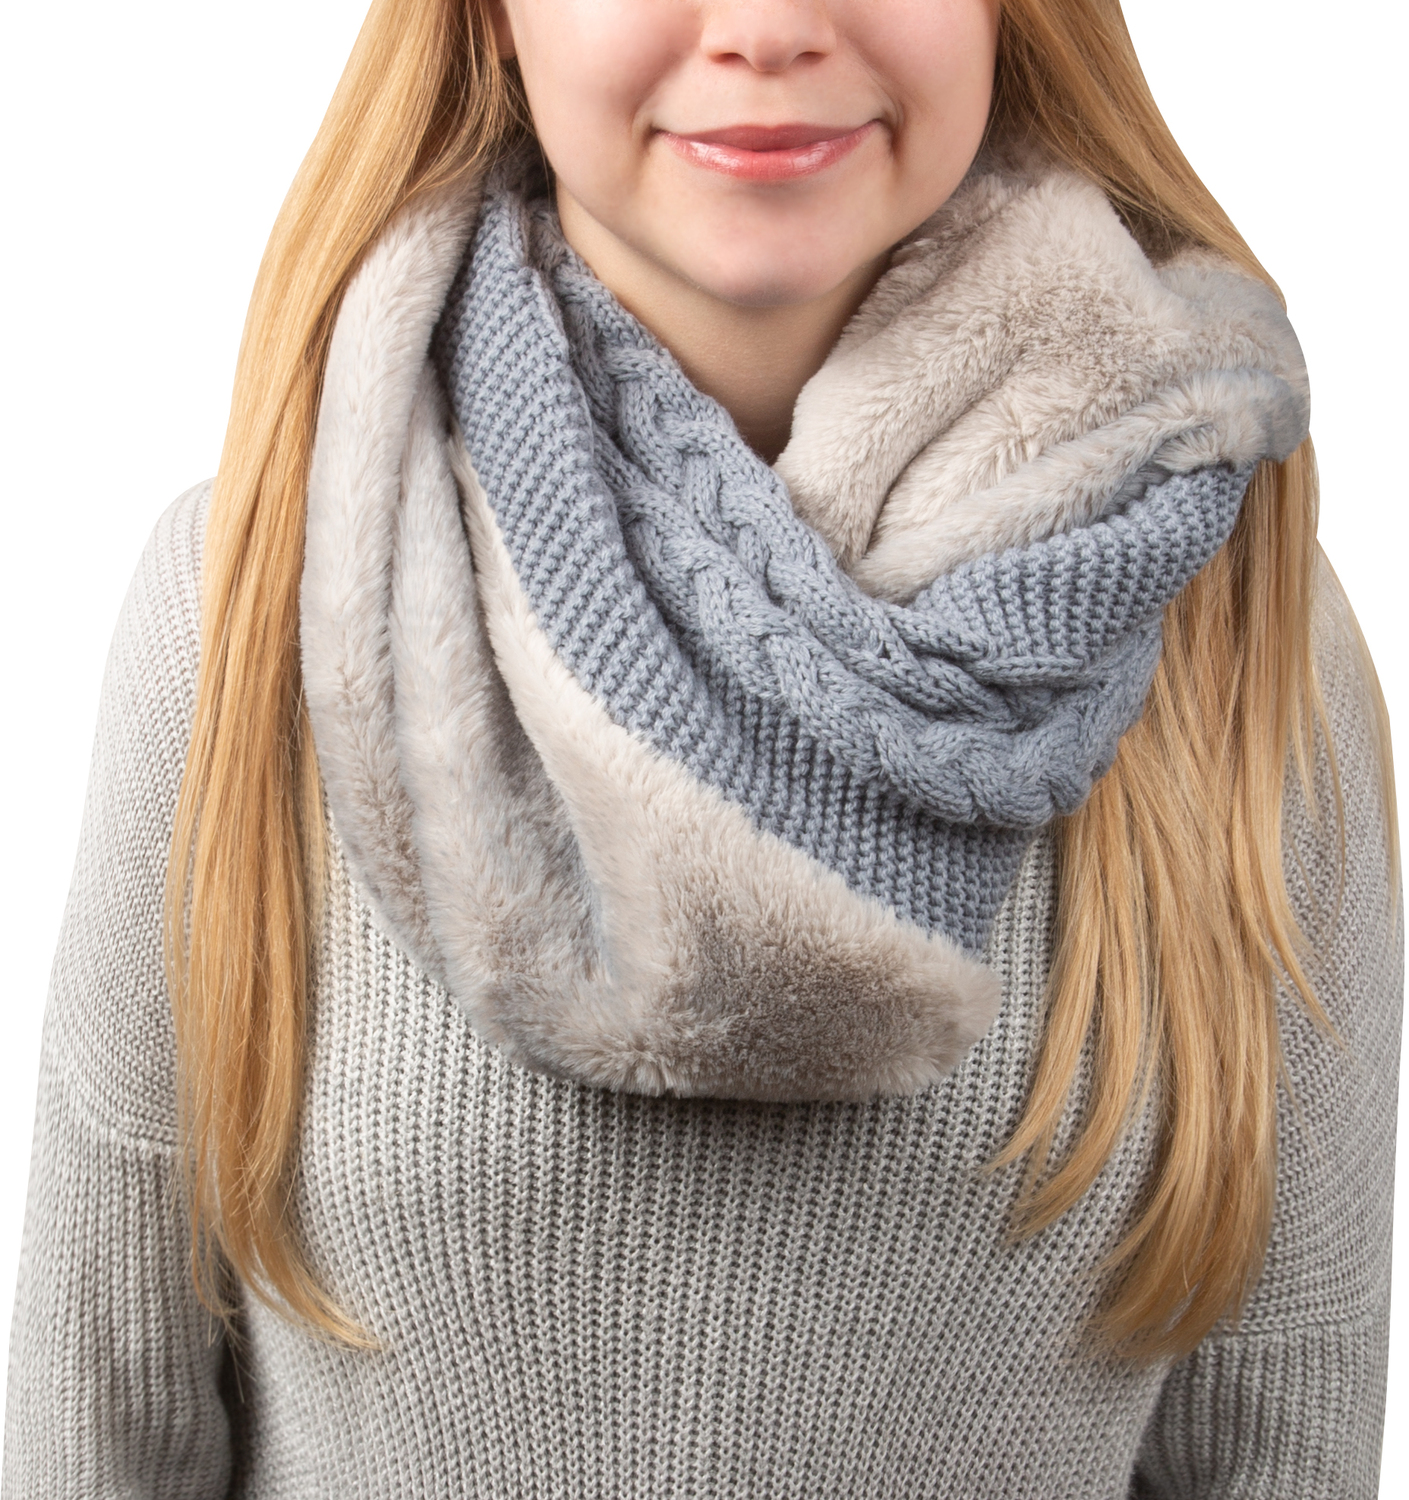 Cadet Blue by H2Z Scarves - Cadet Blue -  Cable Knit & Faux Fur Infinity Scarf